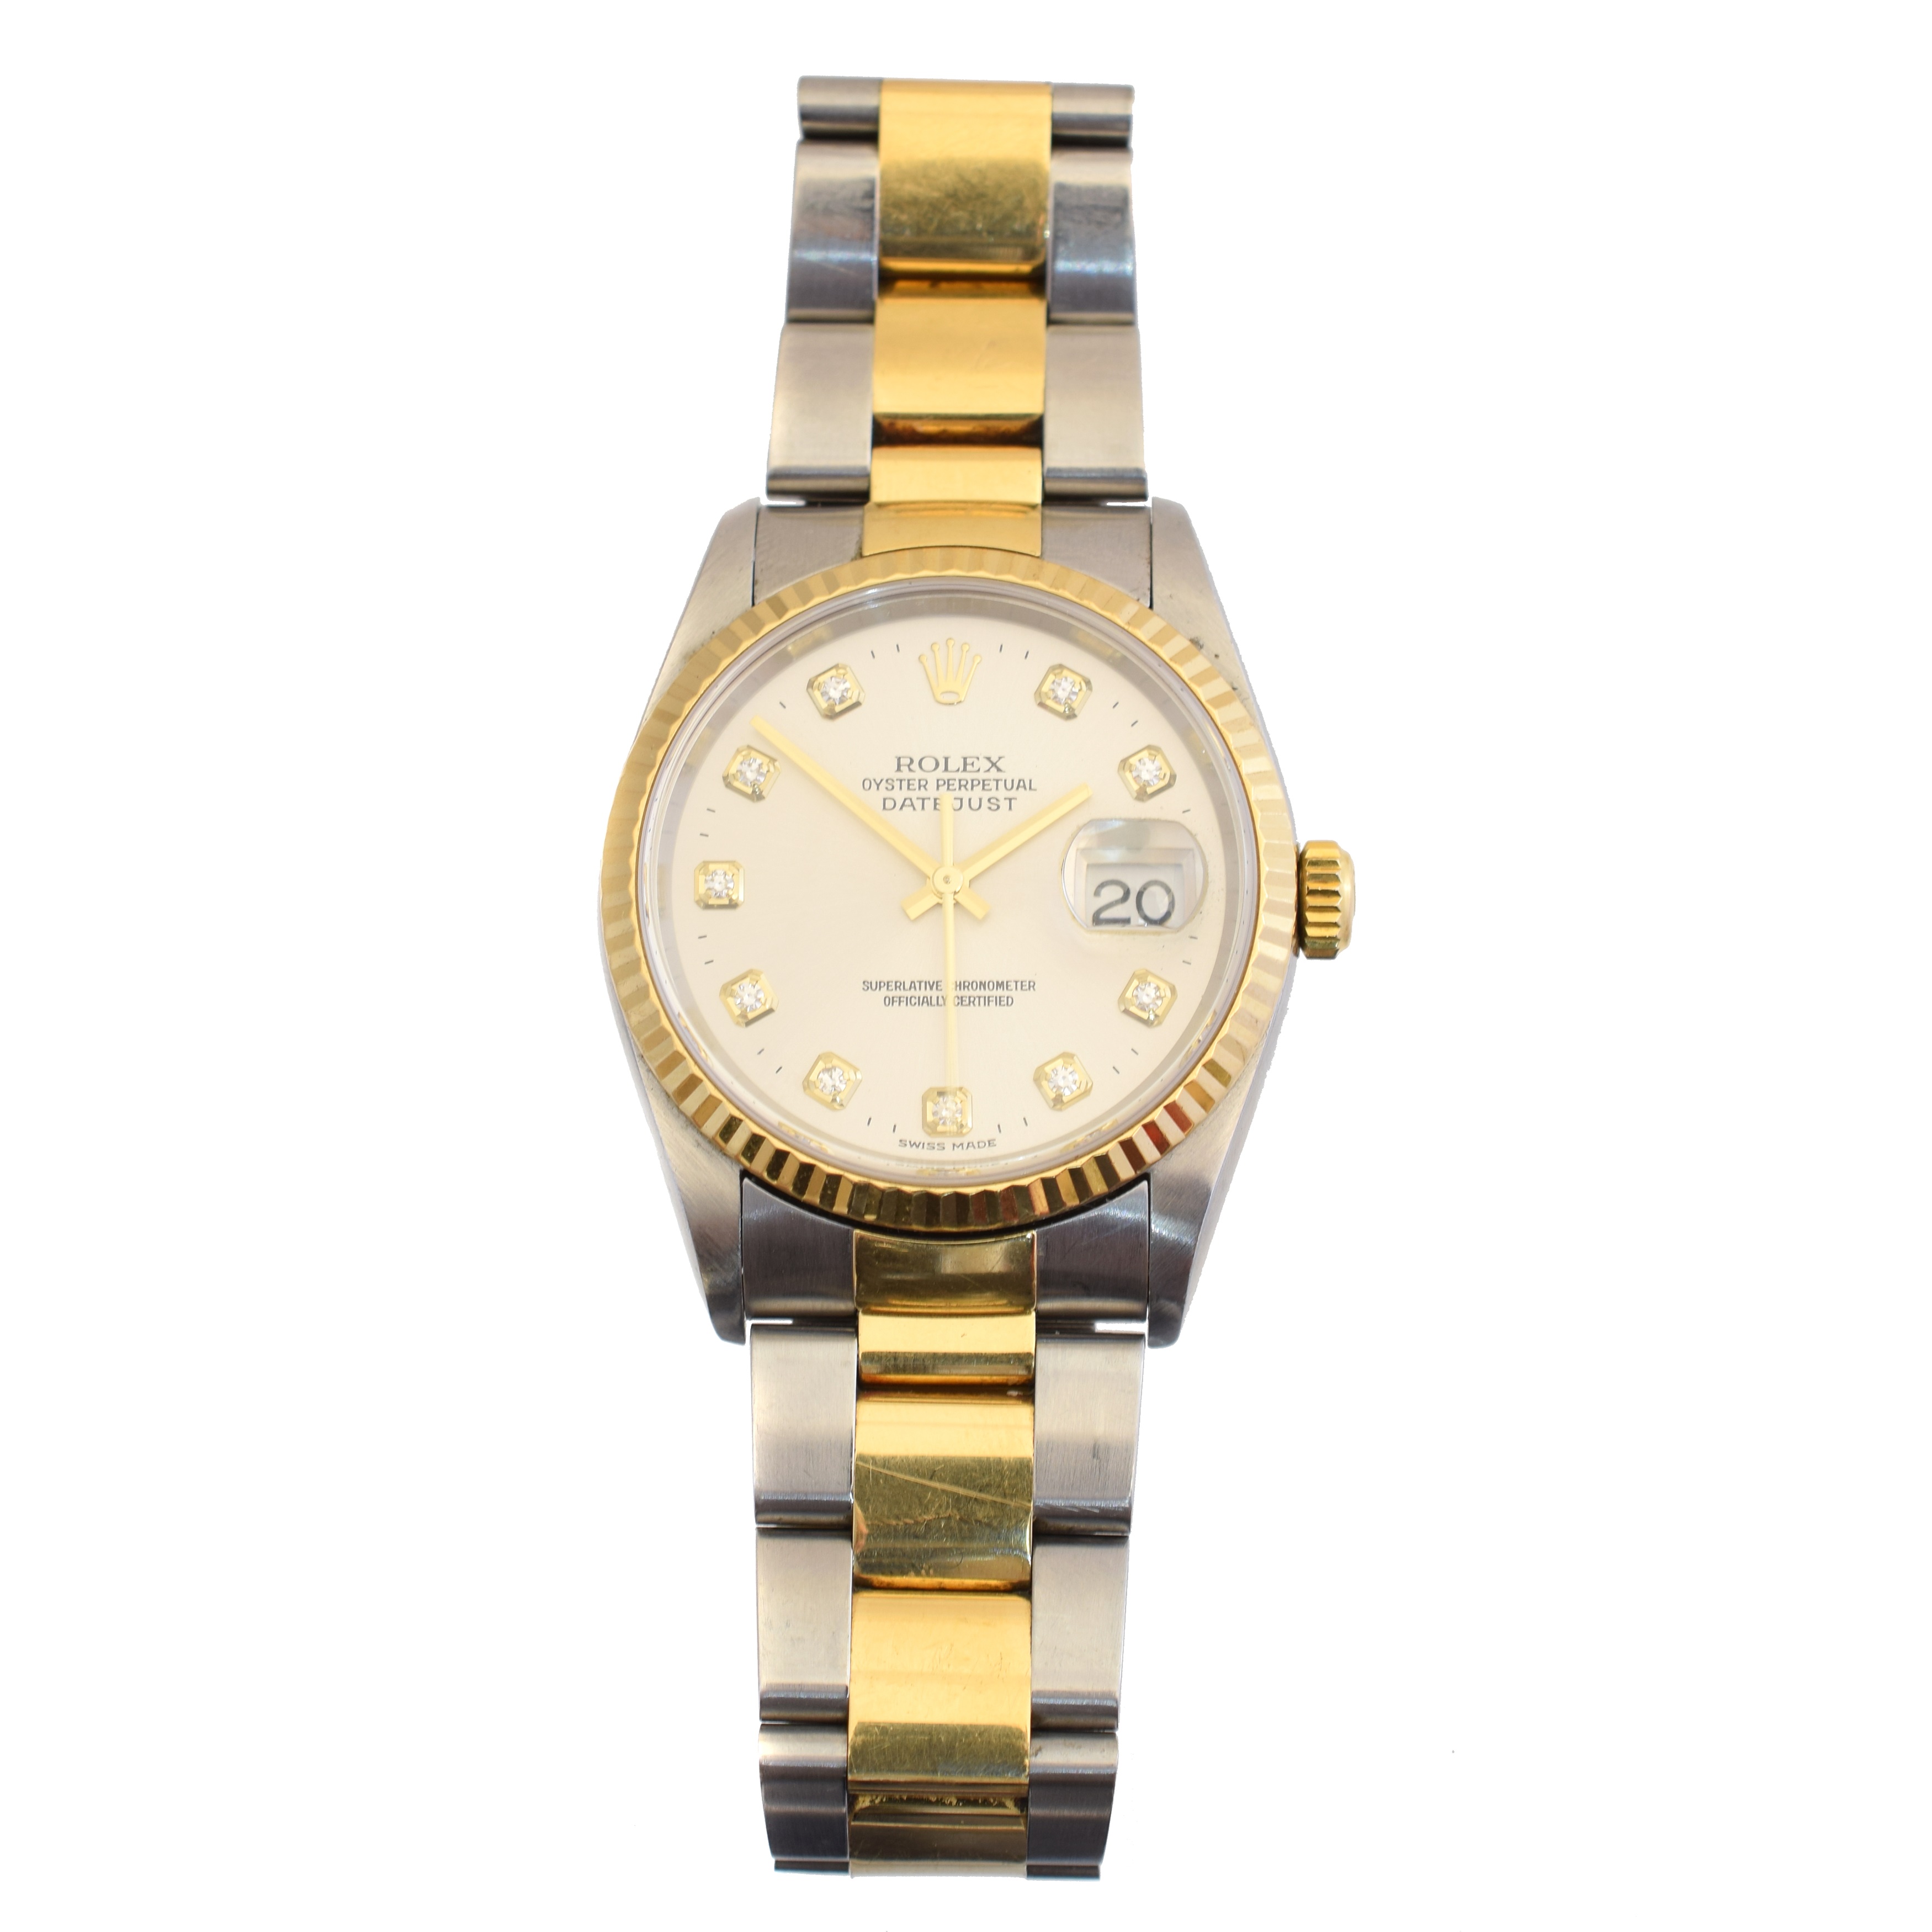 A gents steel and gold Rolex Oyster Perpetual Datejust wristwatch, circa 2002, the circular signed silver tone dial with diamond dot hour markers, date aperture to 3, with fluted bezel and oyster bracelet, model no. 16233, Y213245, case diameter 36mm, with maker's box.